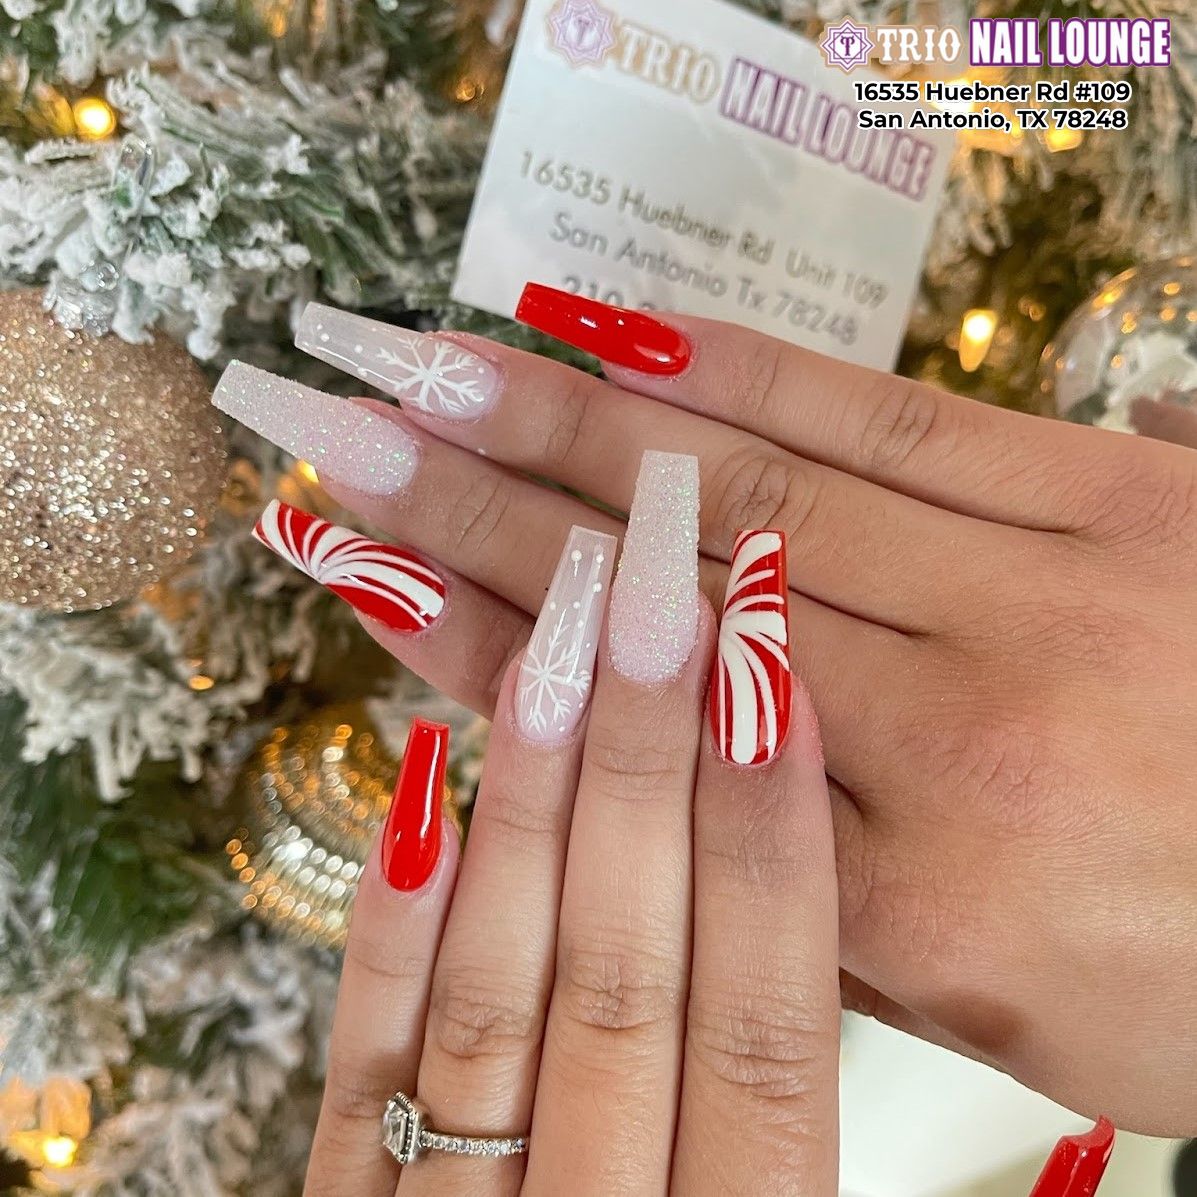 Trio Nail Lounge – Great place for Xmas and Special Holiday nails